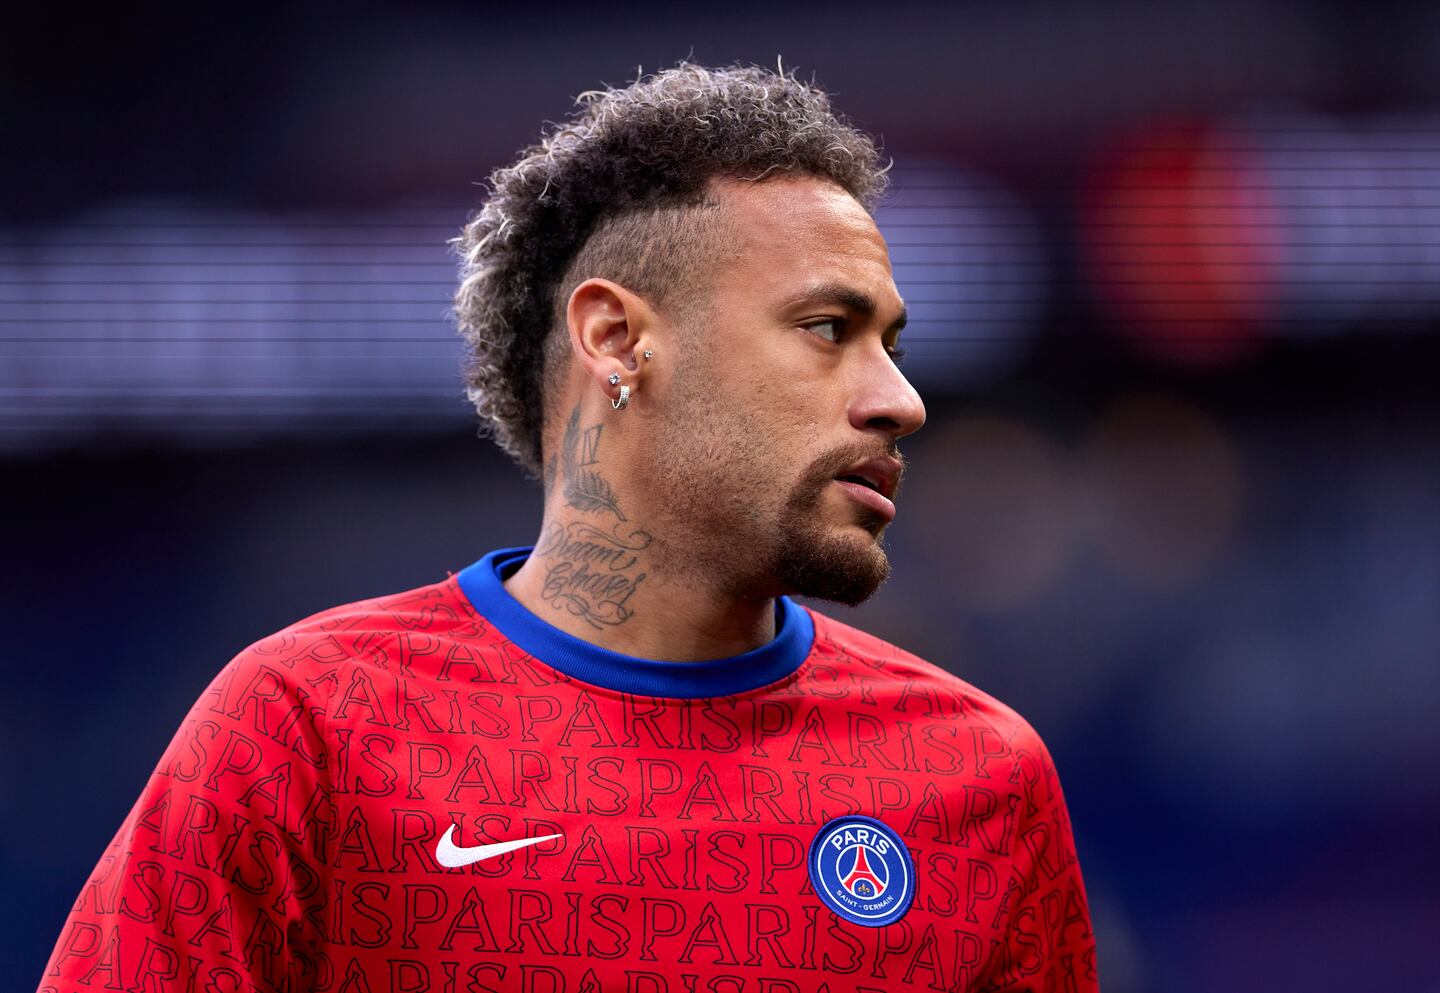 Neymar Jr's contract with the sports giant was terminated after sexual assault allegations surfaced. Getty Images.